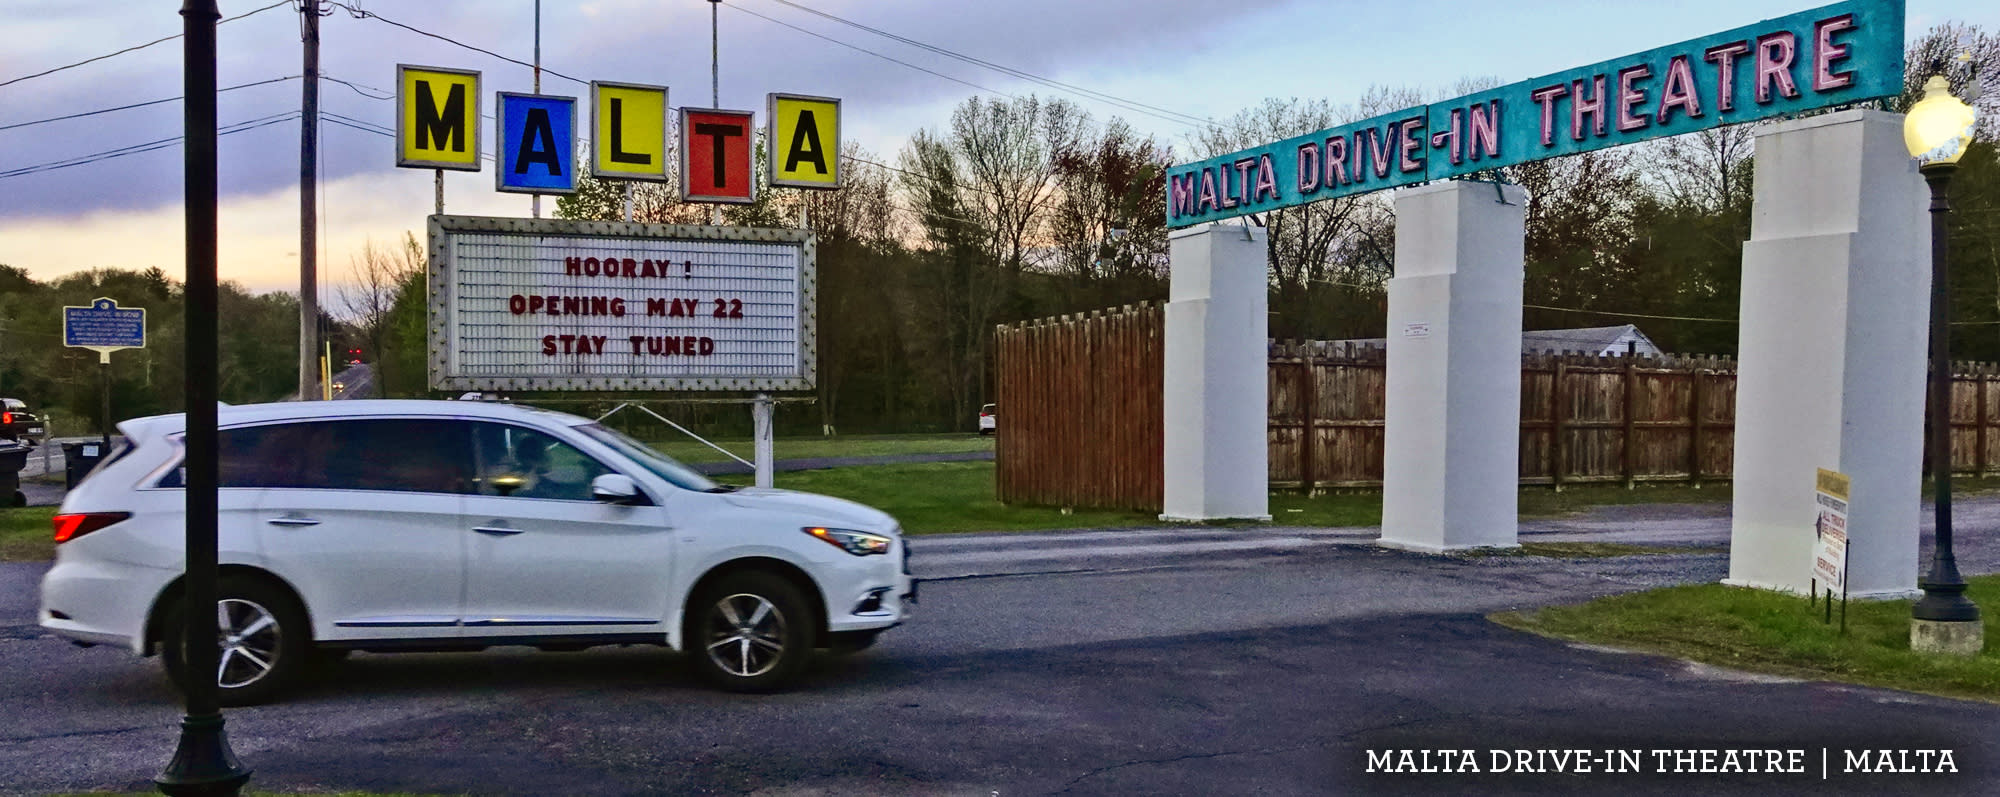 Outside the Malta Drive-in Movie Theater